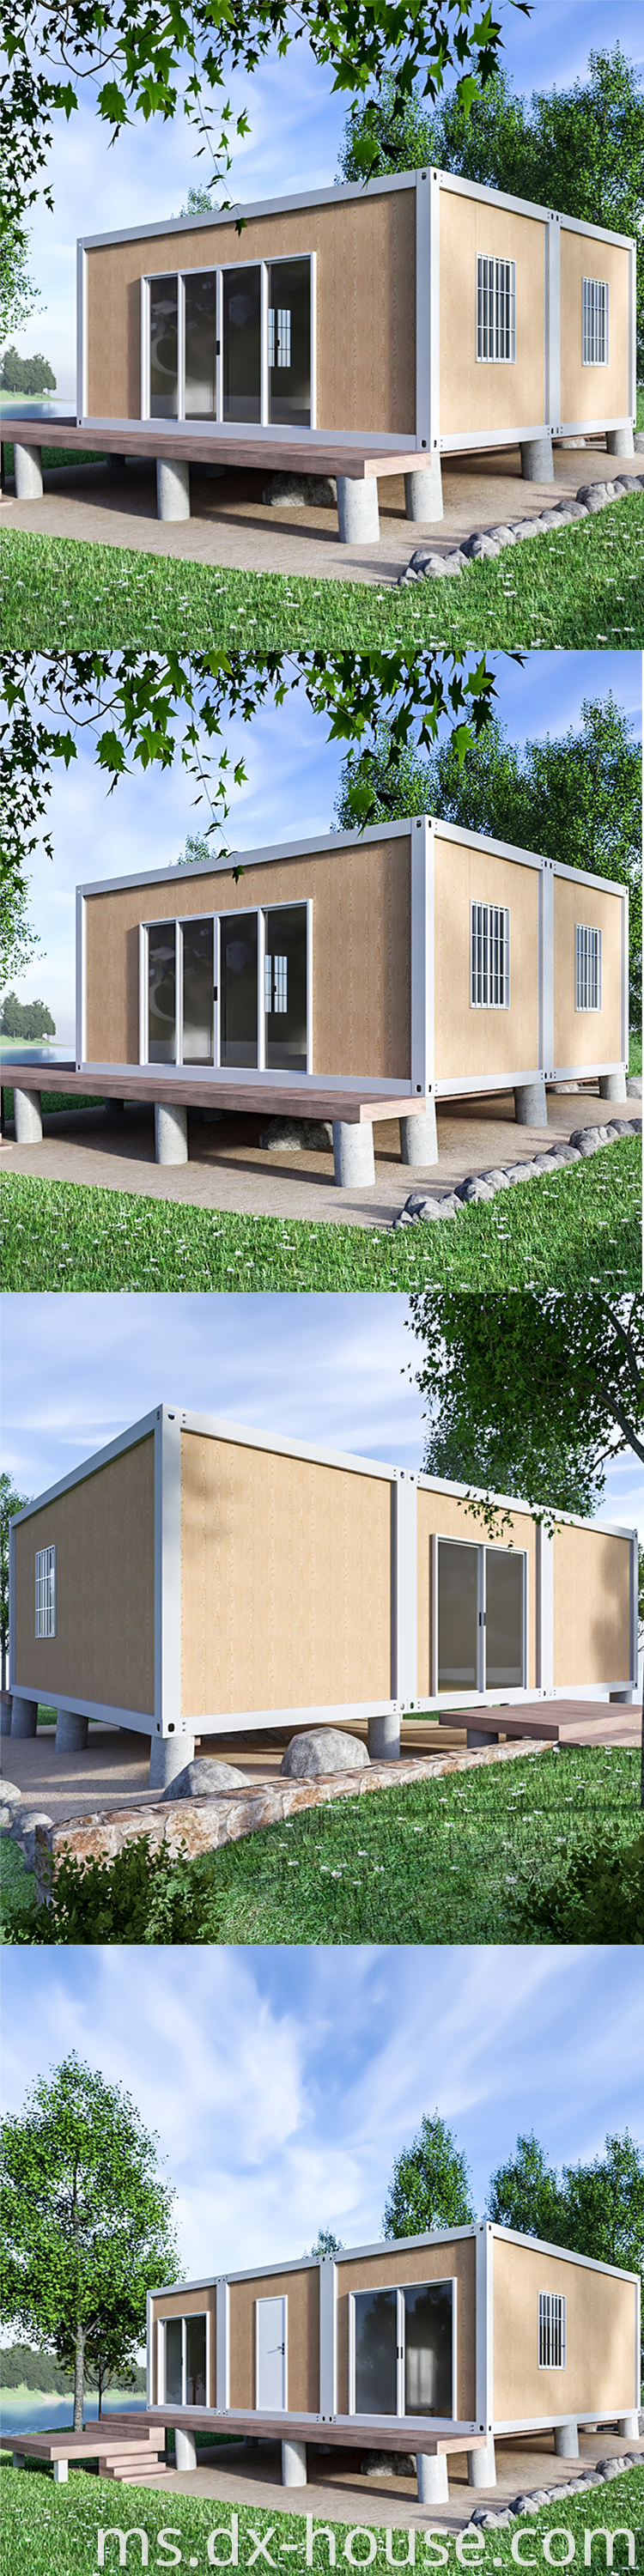 affordable shipping container homes